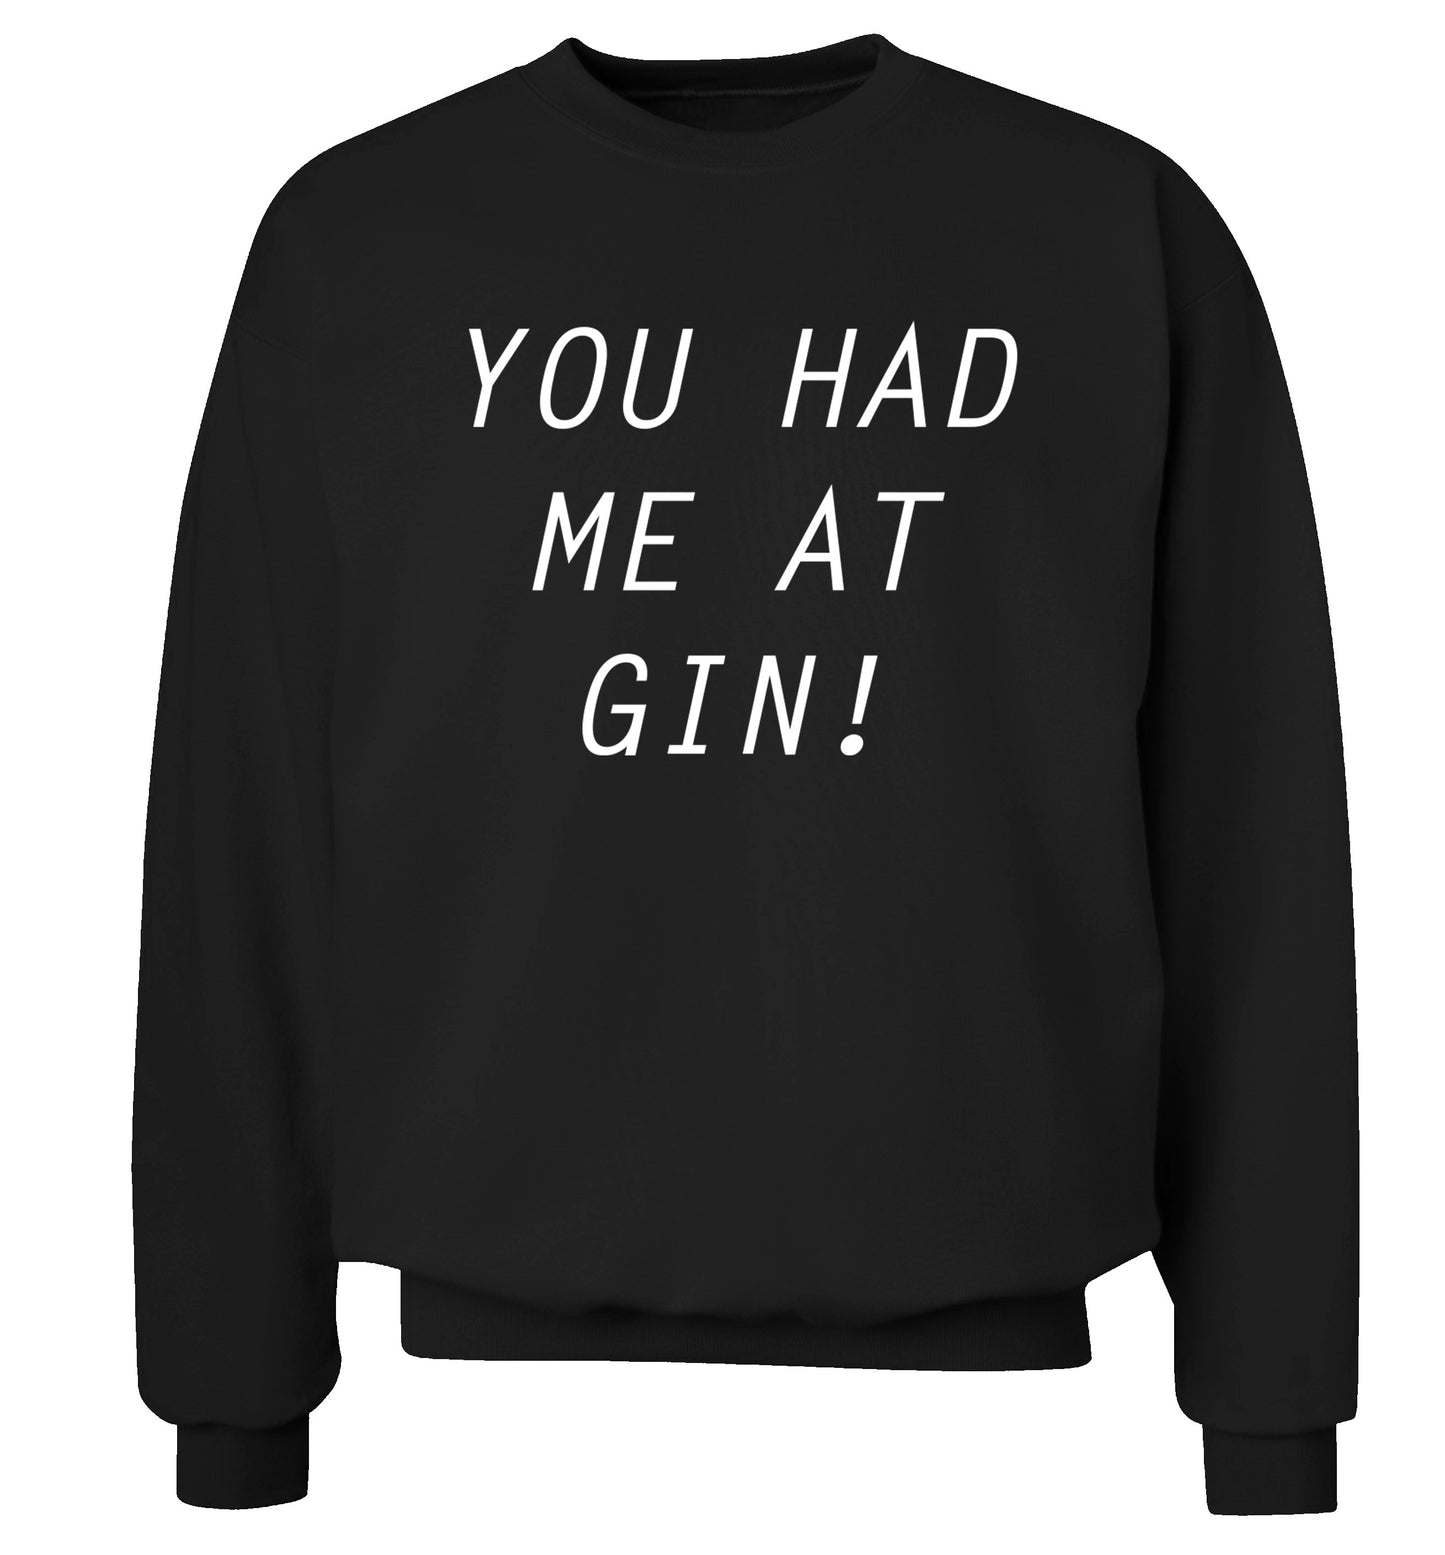 You had me at gin Adult's unisex black Sweater 2XL